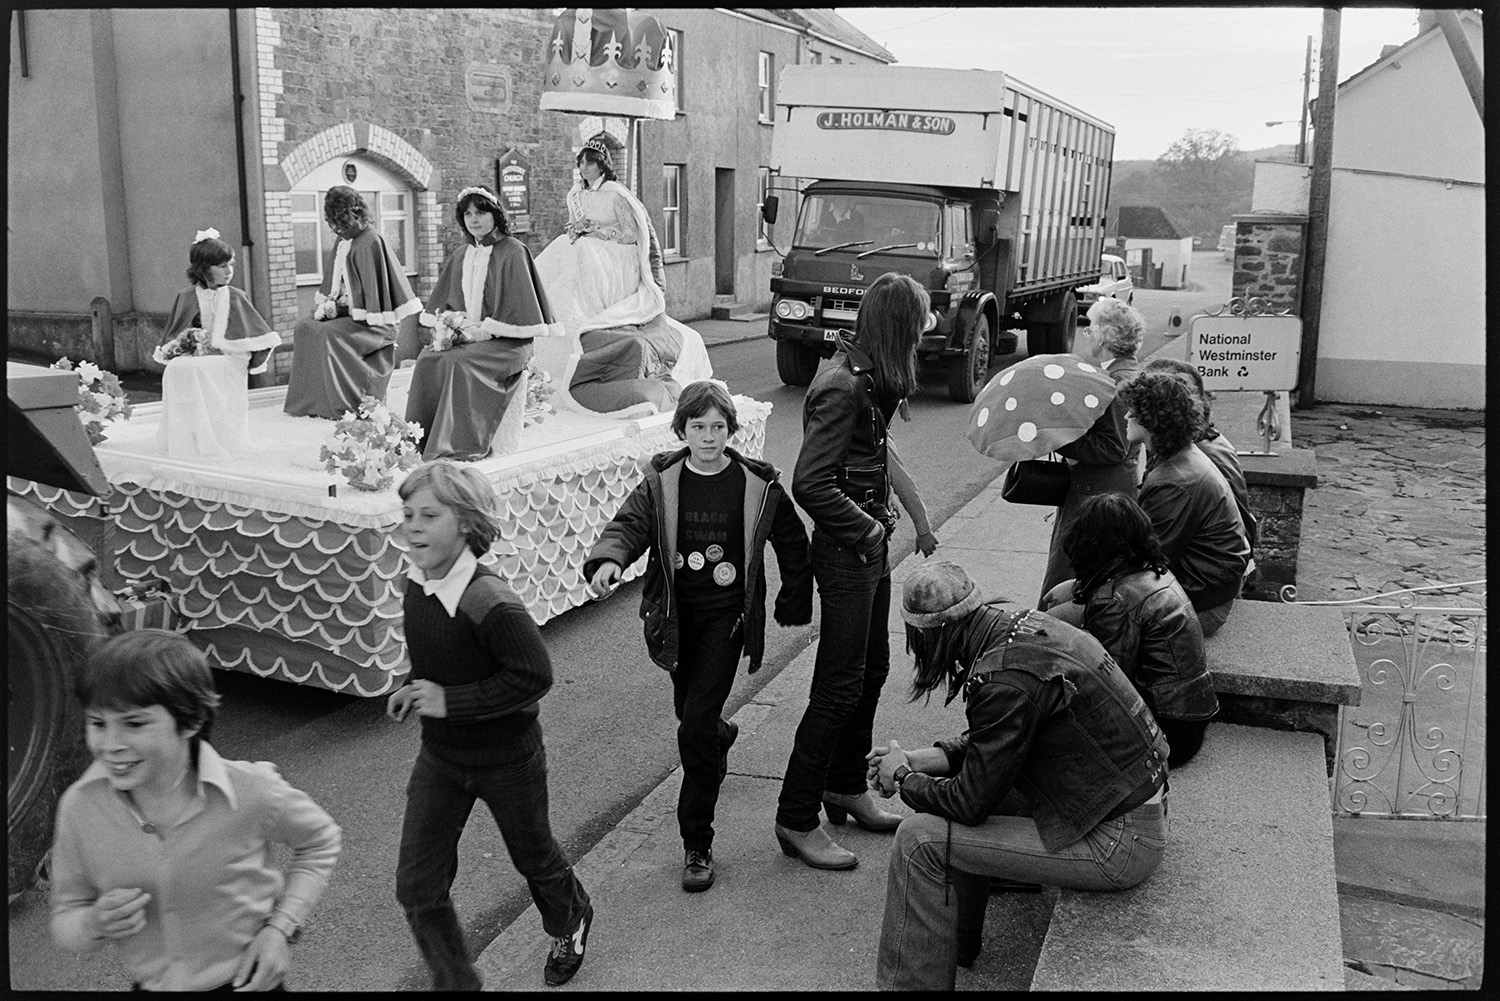 Crowning of Carnival Queen on float, procession through town with onlookers. 
[Teenagers wearing leather jackets sat on a wall watching the Hatherleigh Carnival Queen and her attendants parade past on a carnival float. Three boys are also running past them. A livestock lorry is following the carnival float along the street.]